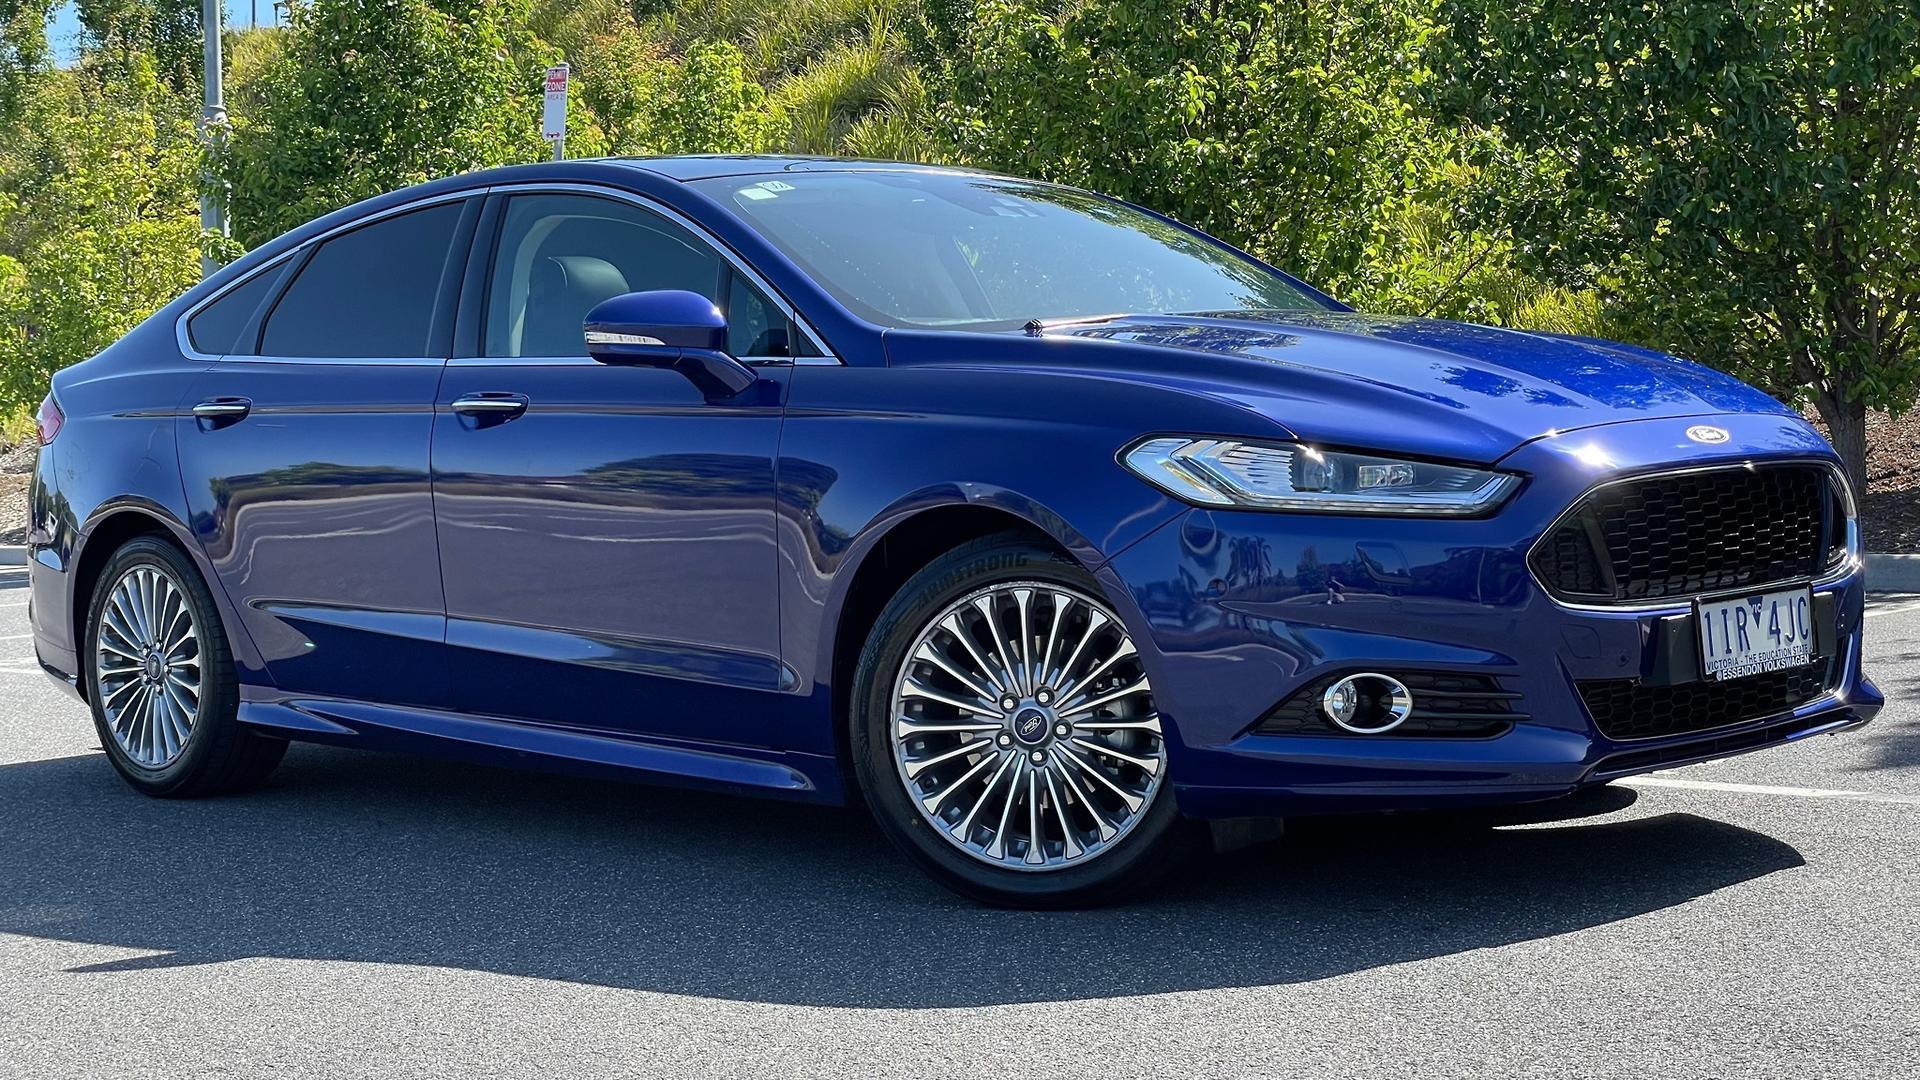 Ford Mondeo image 1